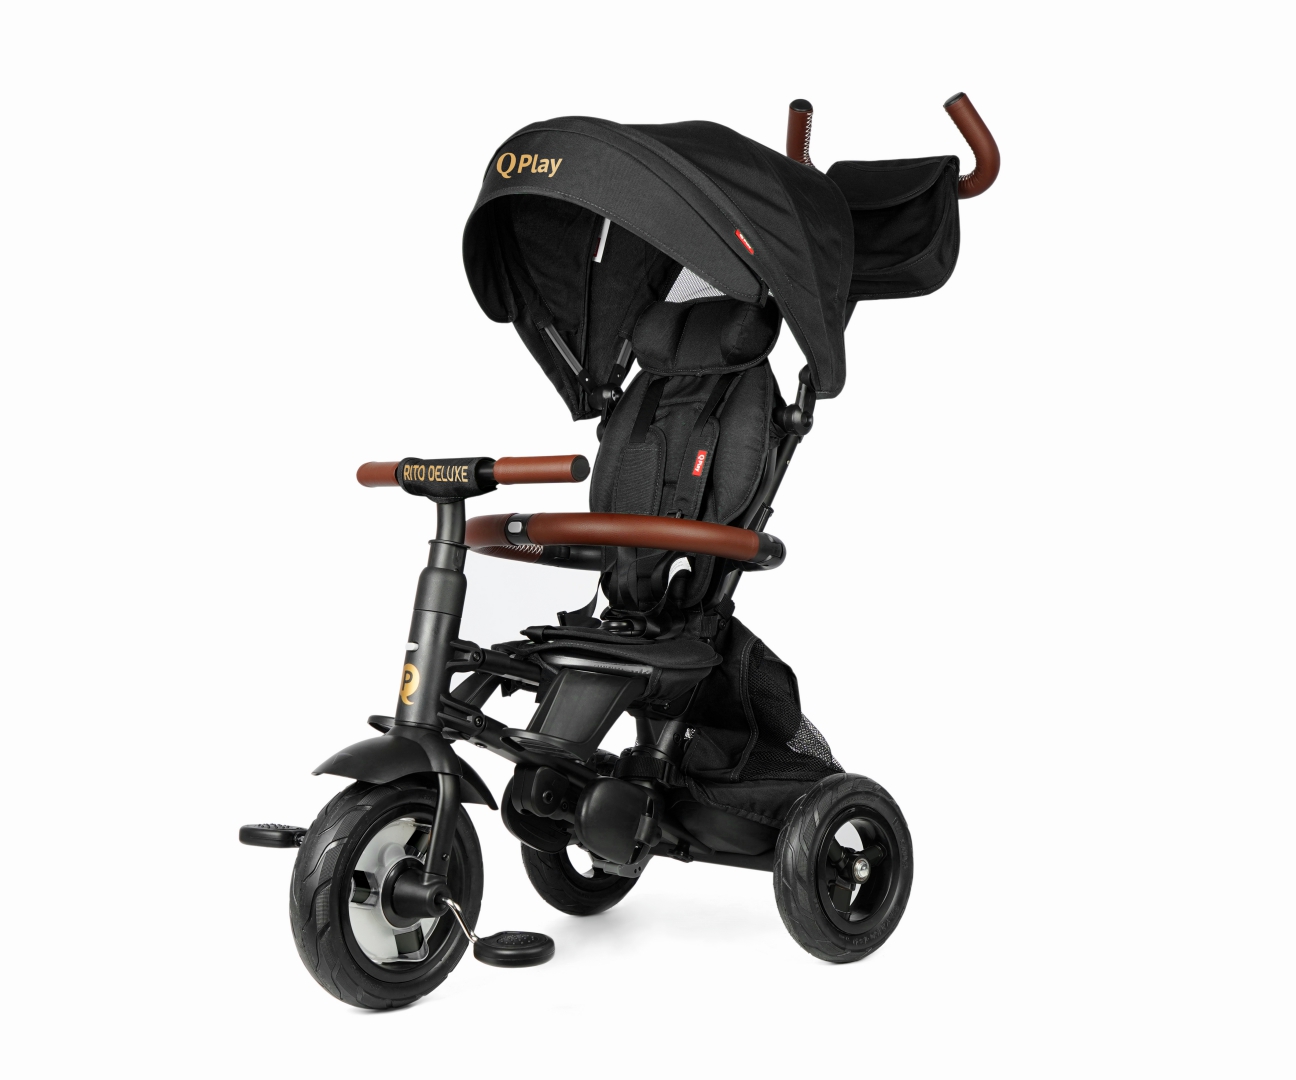 Qplay Tricycle Rito Deluxe kummist must